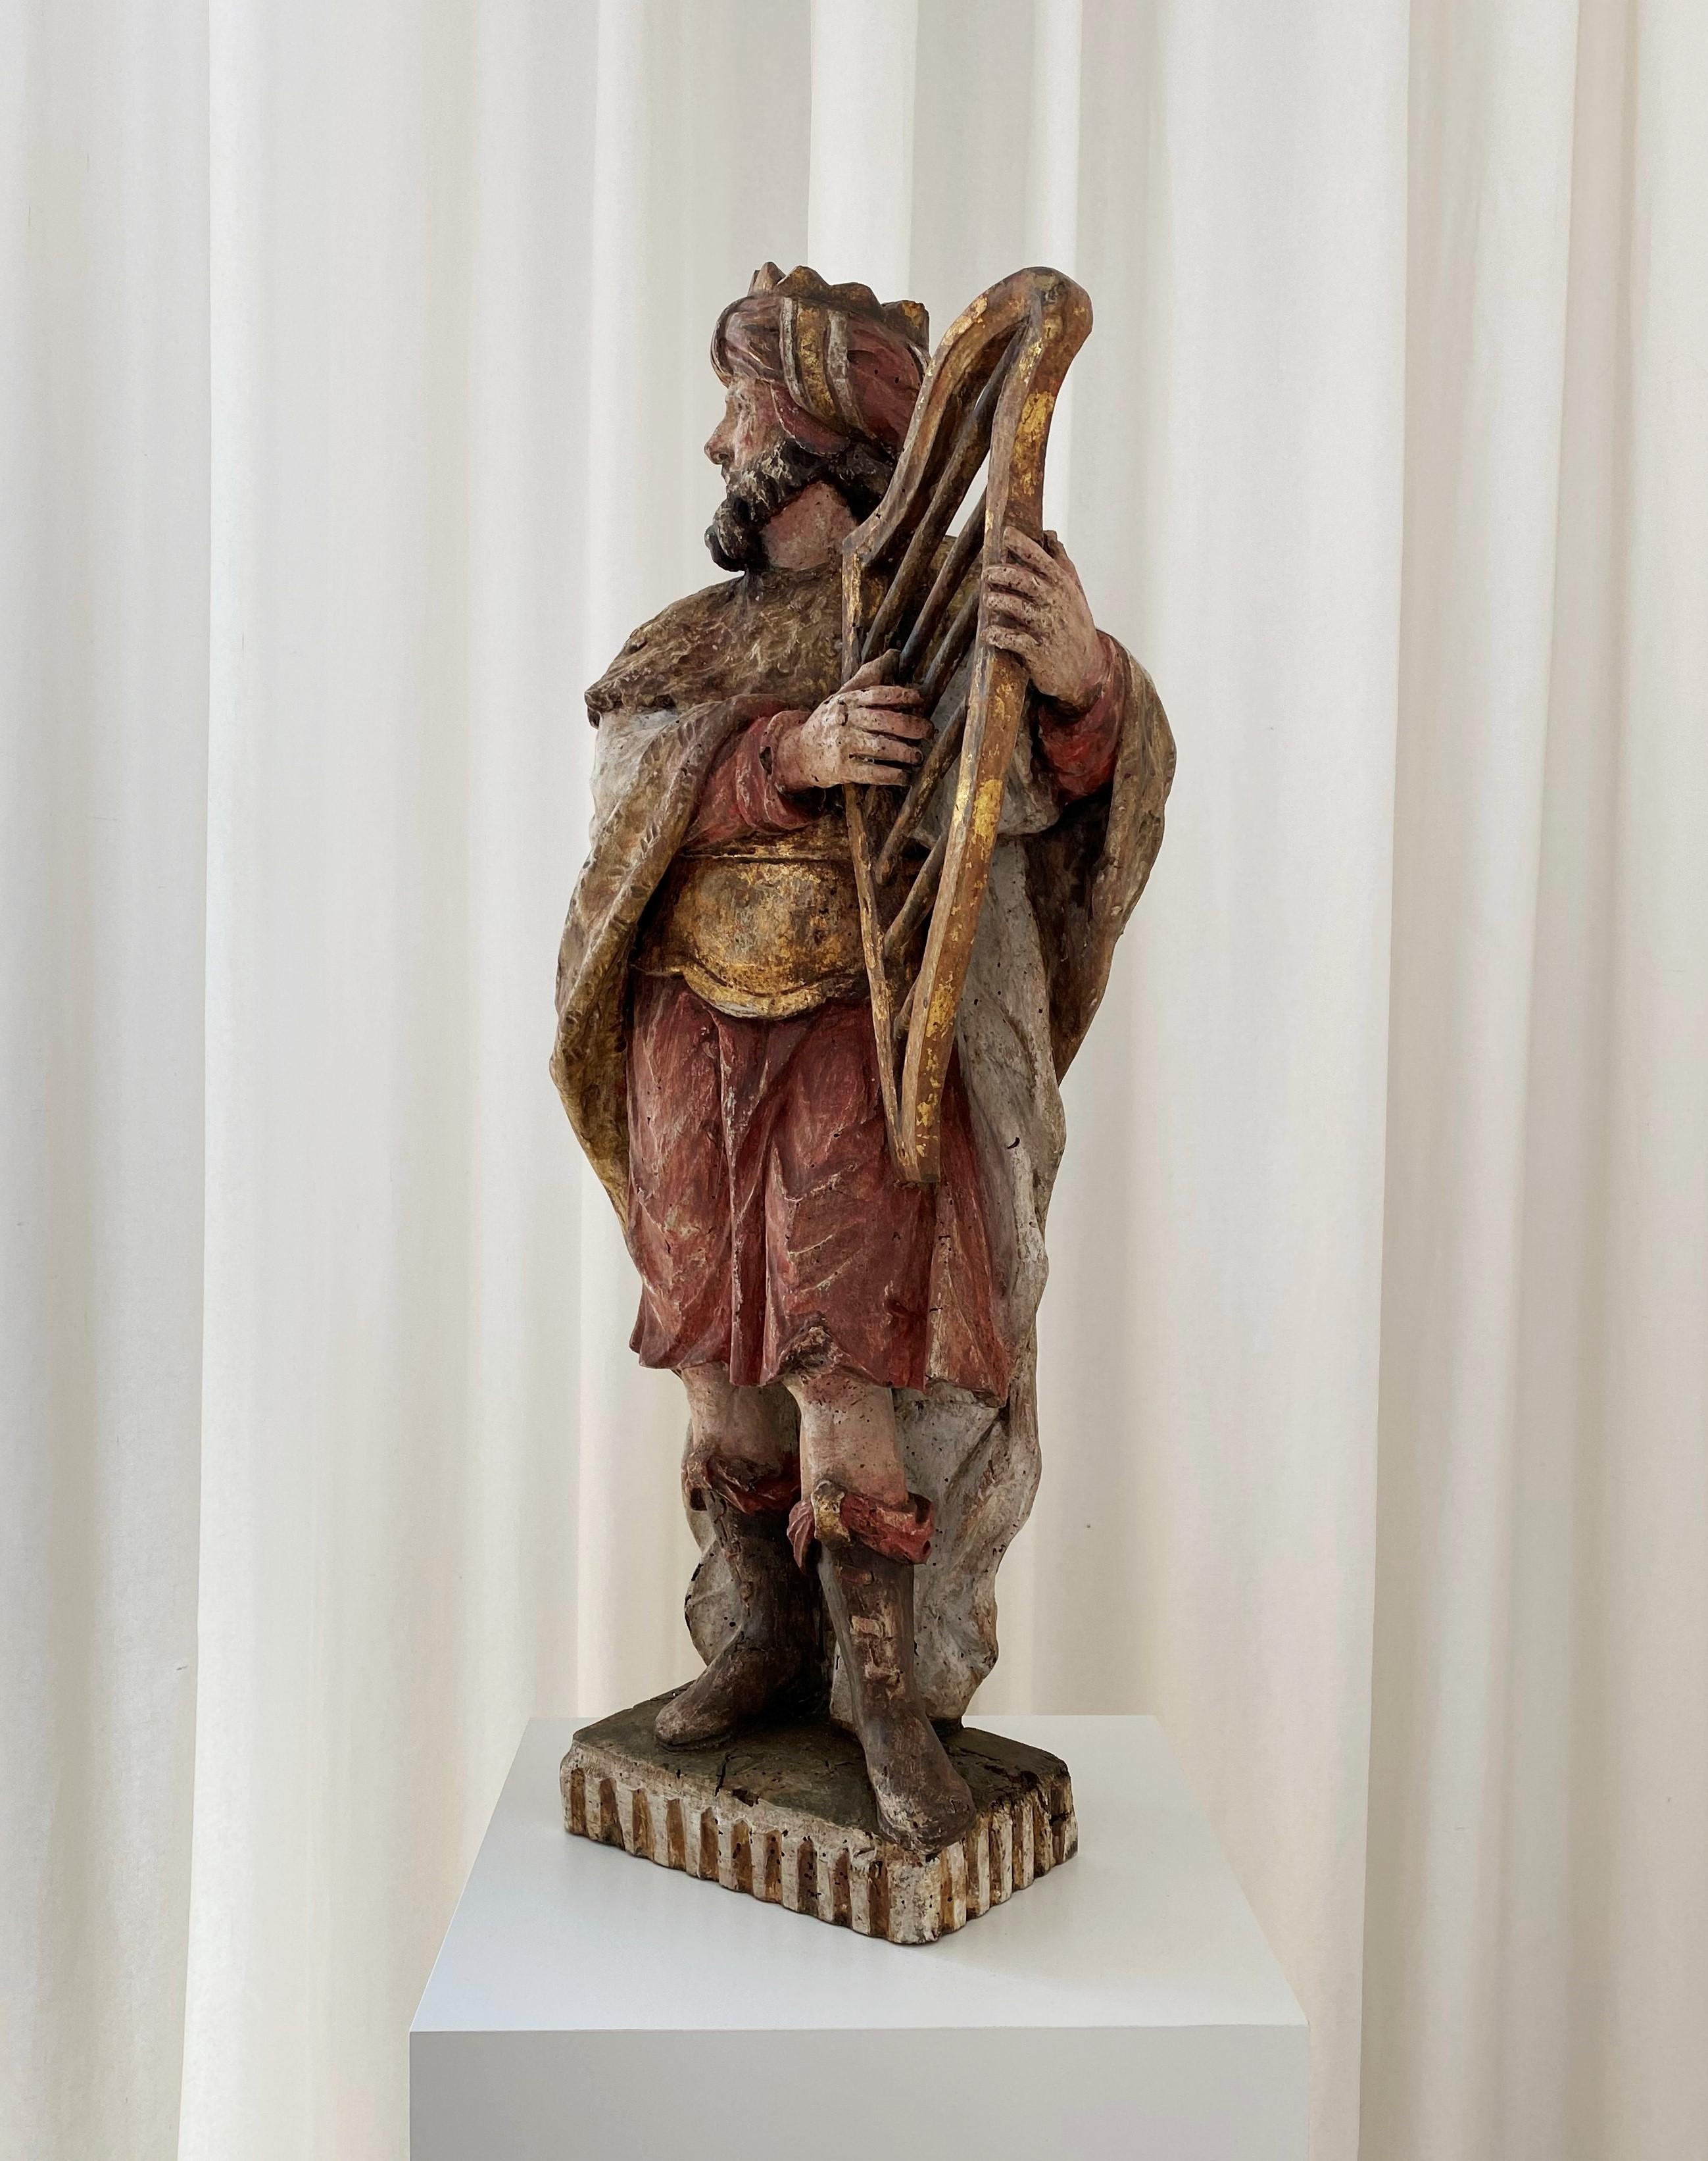 Baroque 17th Century Polychrome Carved Sculpture of King David Playing the Harp